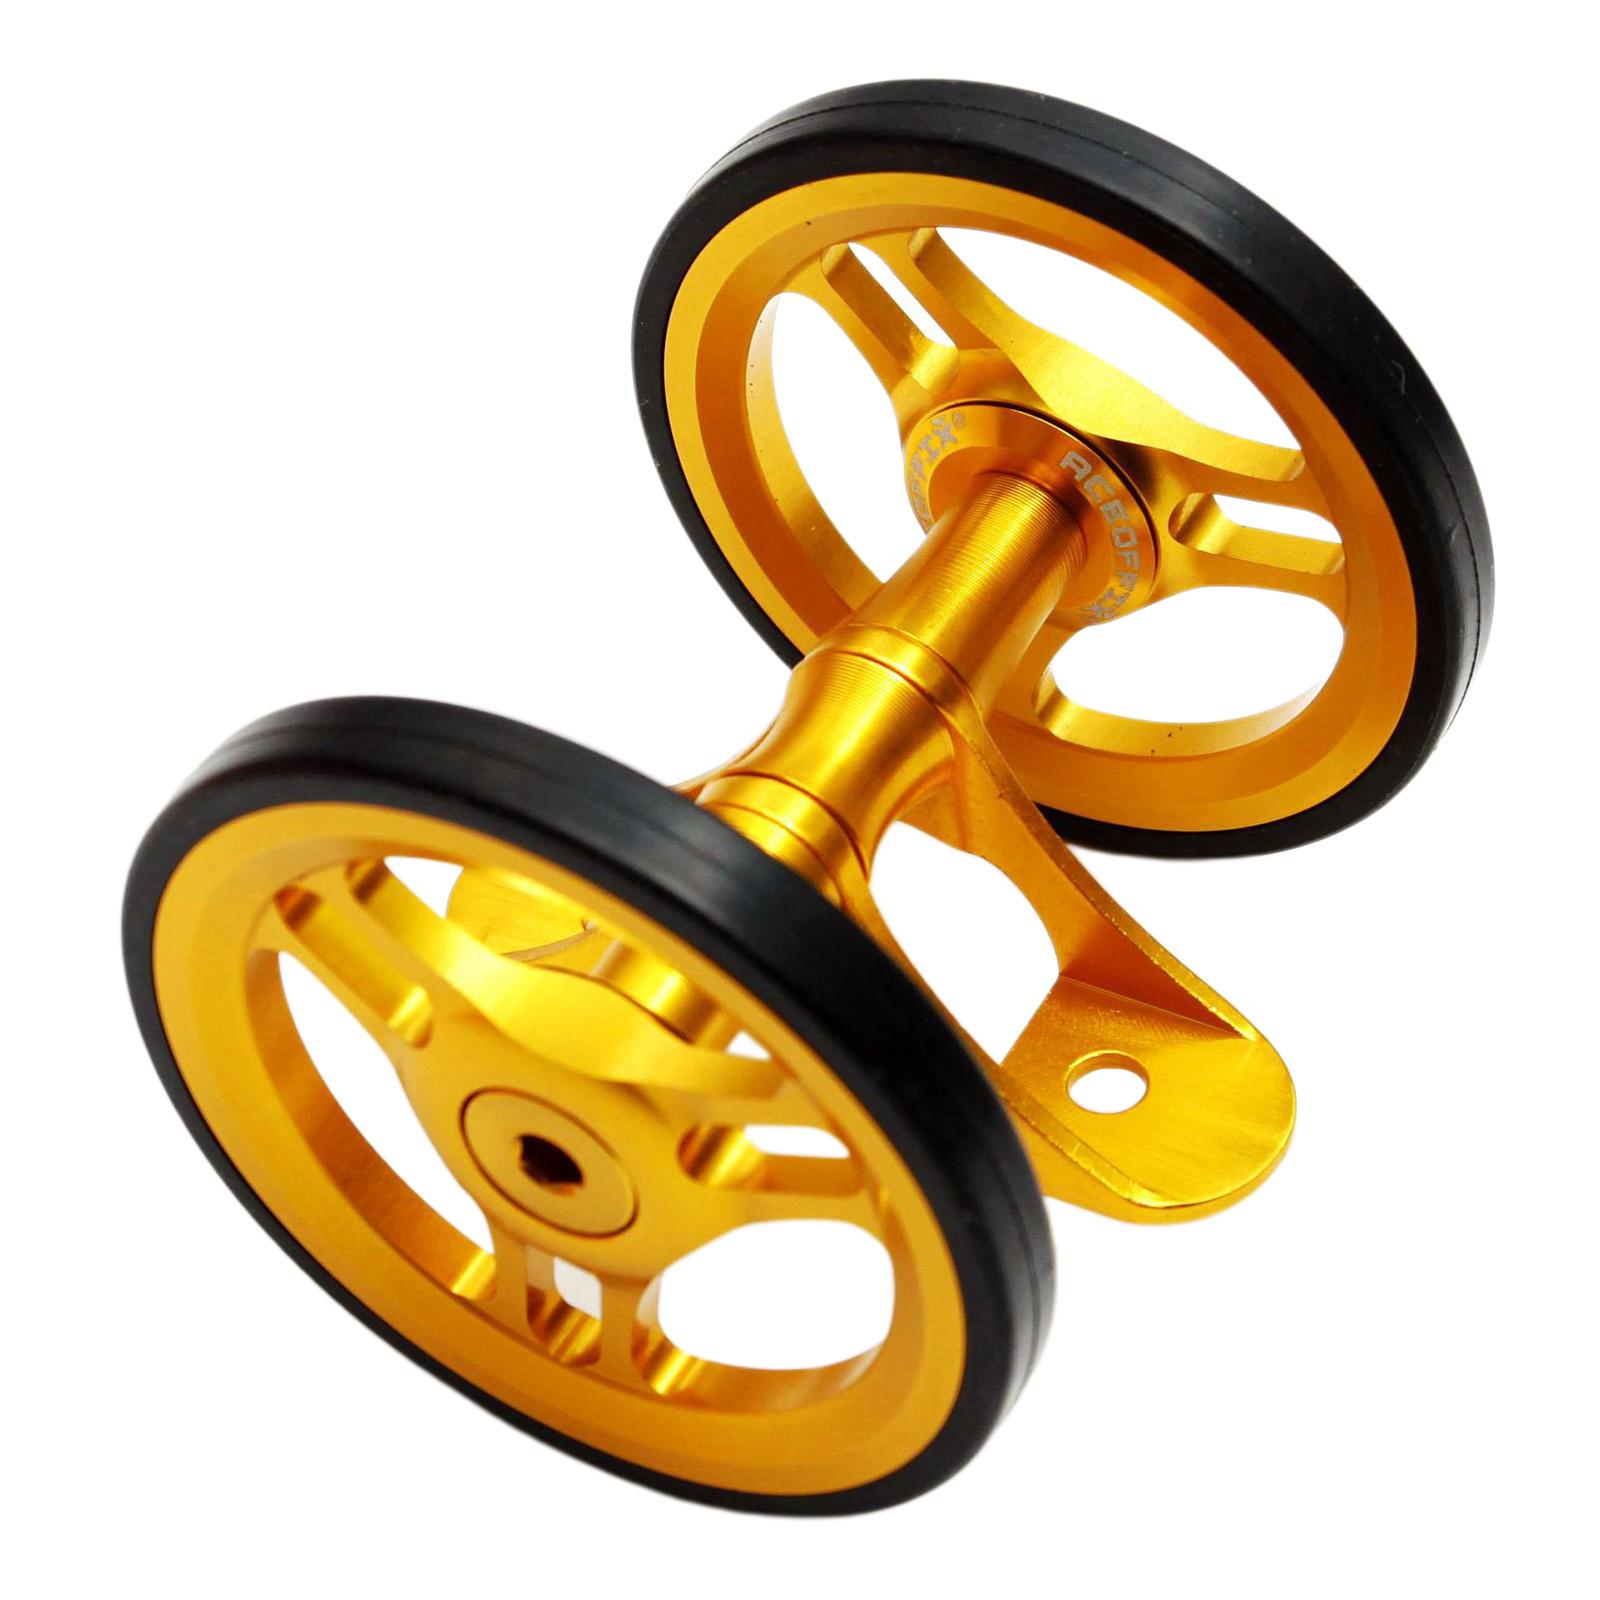 Folding Bike Easy Wheel Bicycle Mudguard for Bicycle Outdoors gold